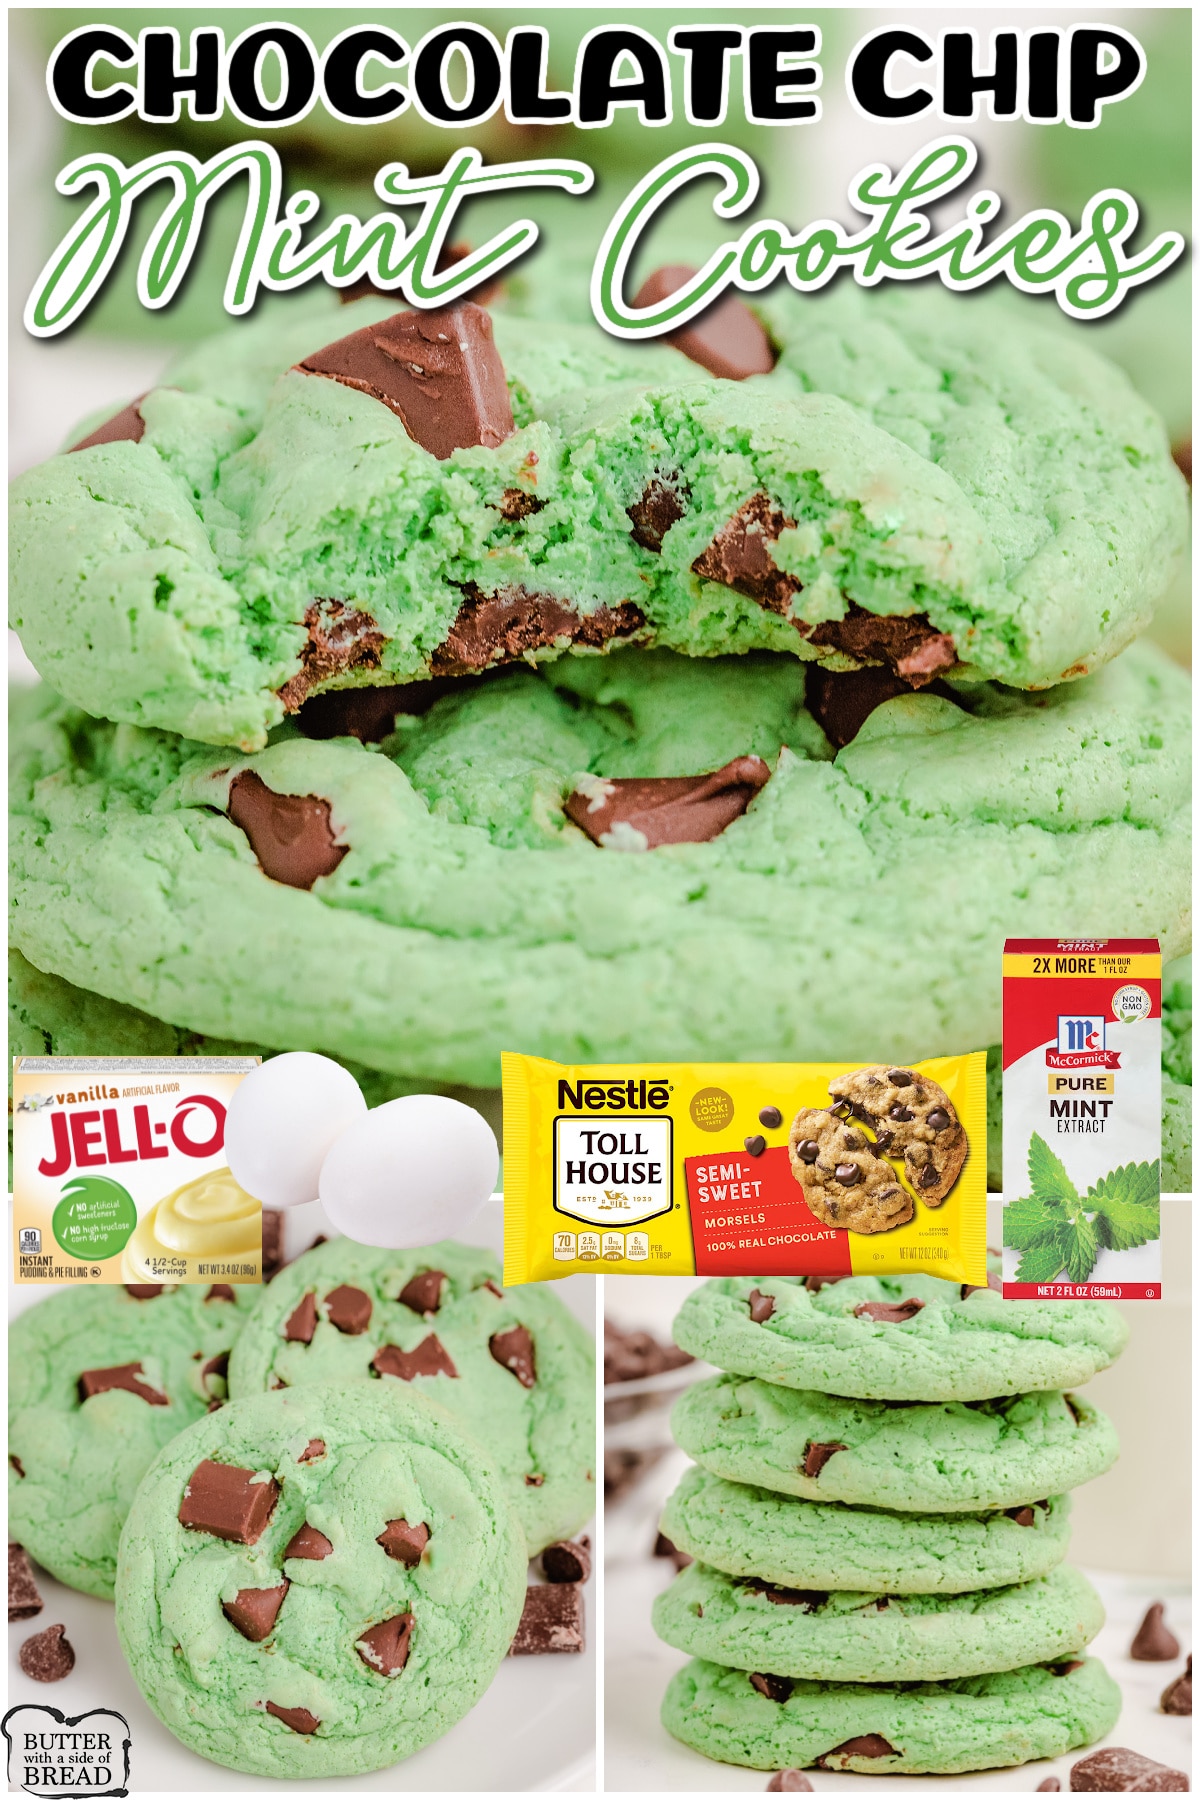 Mint Chocolate Chip Cookies are a sensational dessert made with pudding mix, mint extract and chocolate chips. This amazing mint cookie recipe is perfect for those who love mint chip ice cream!